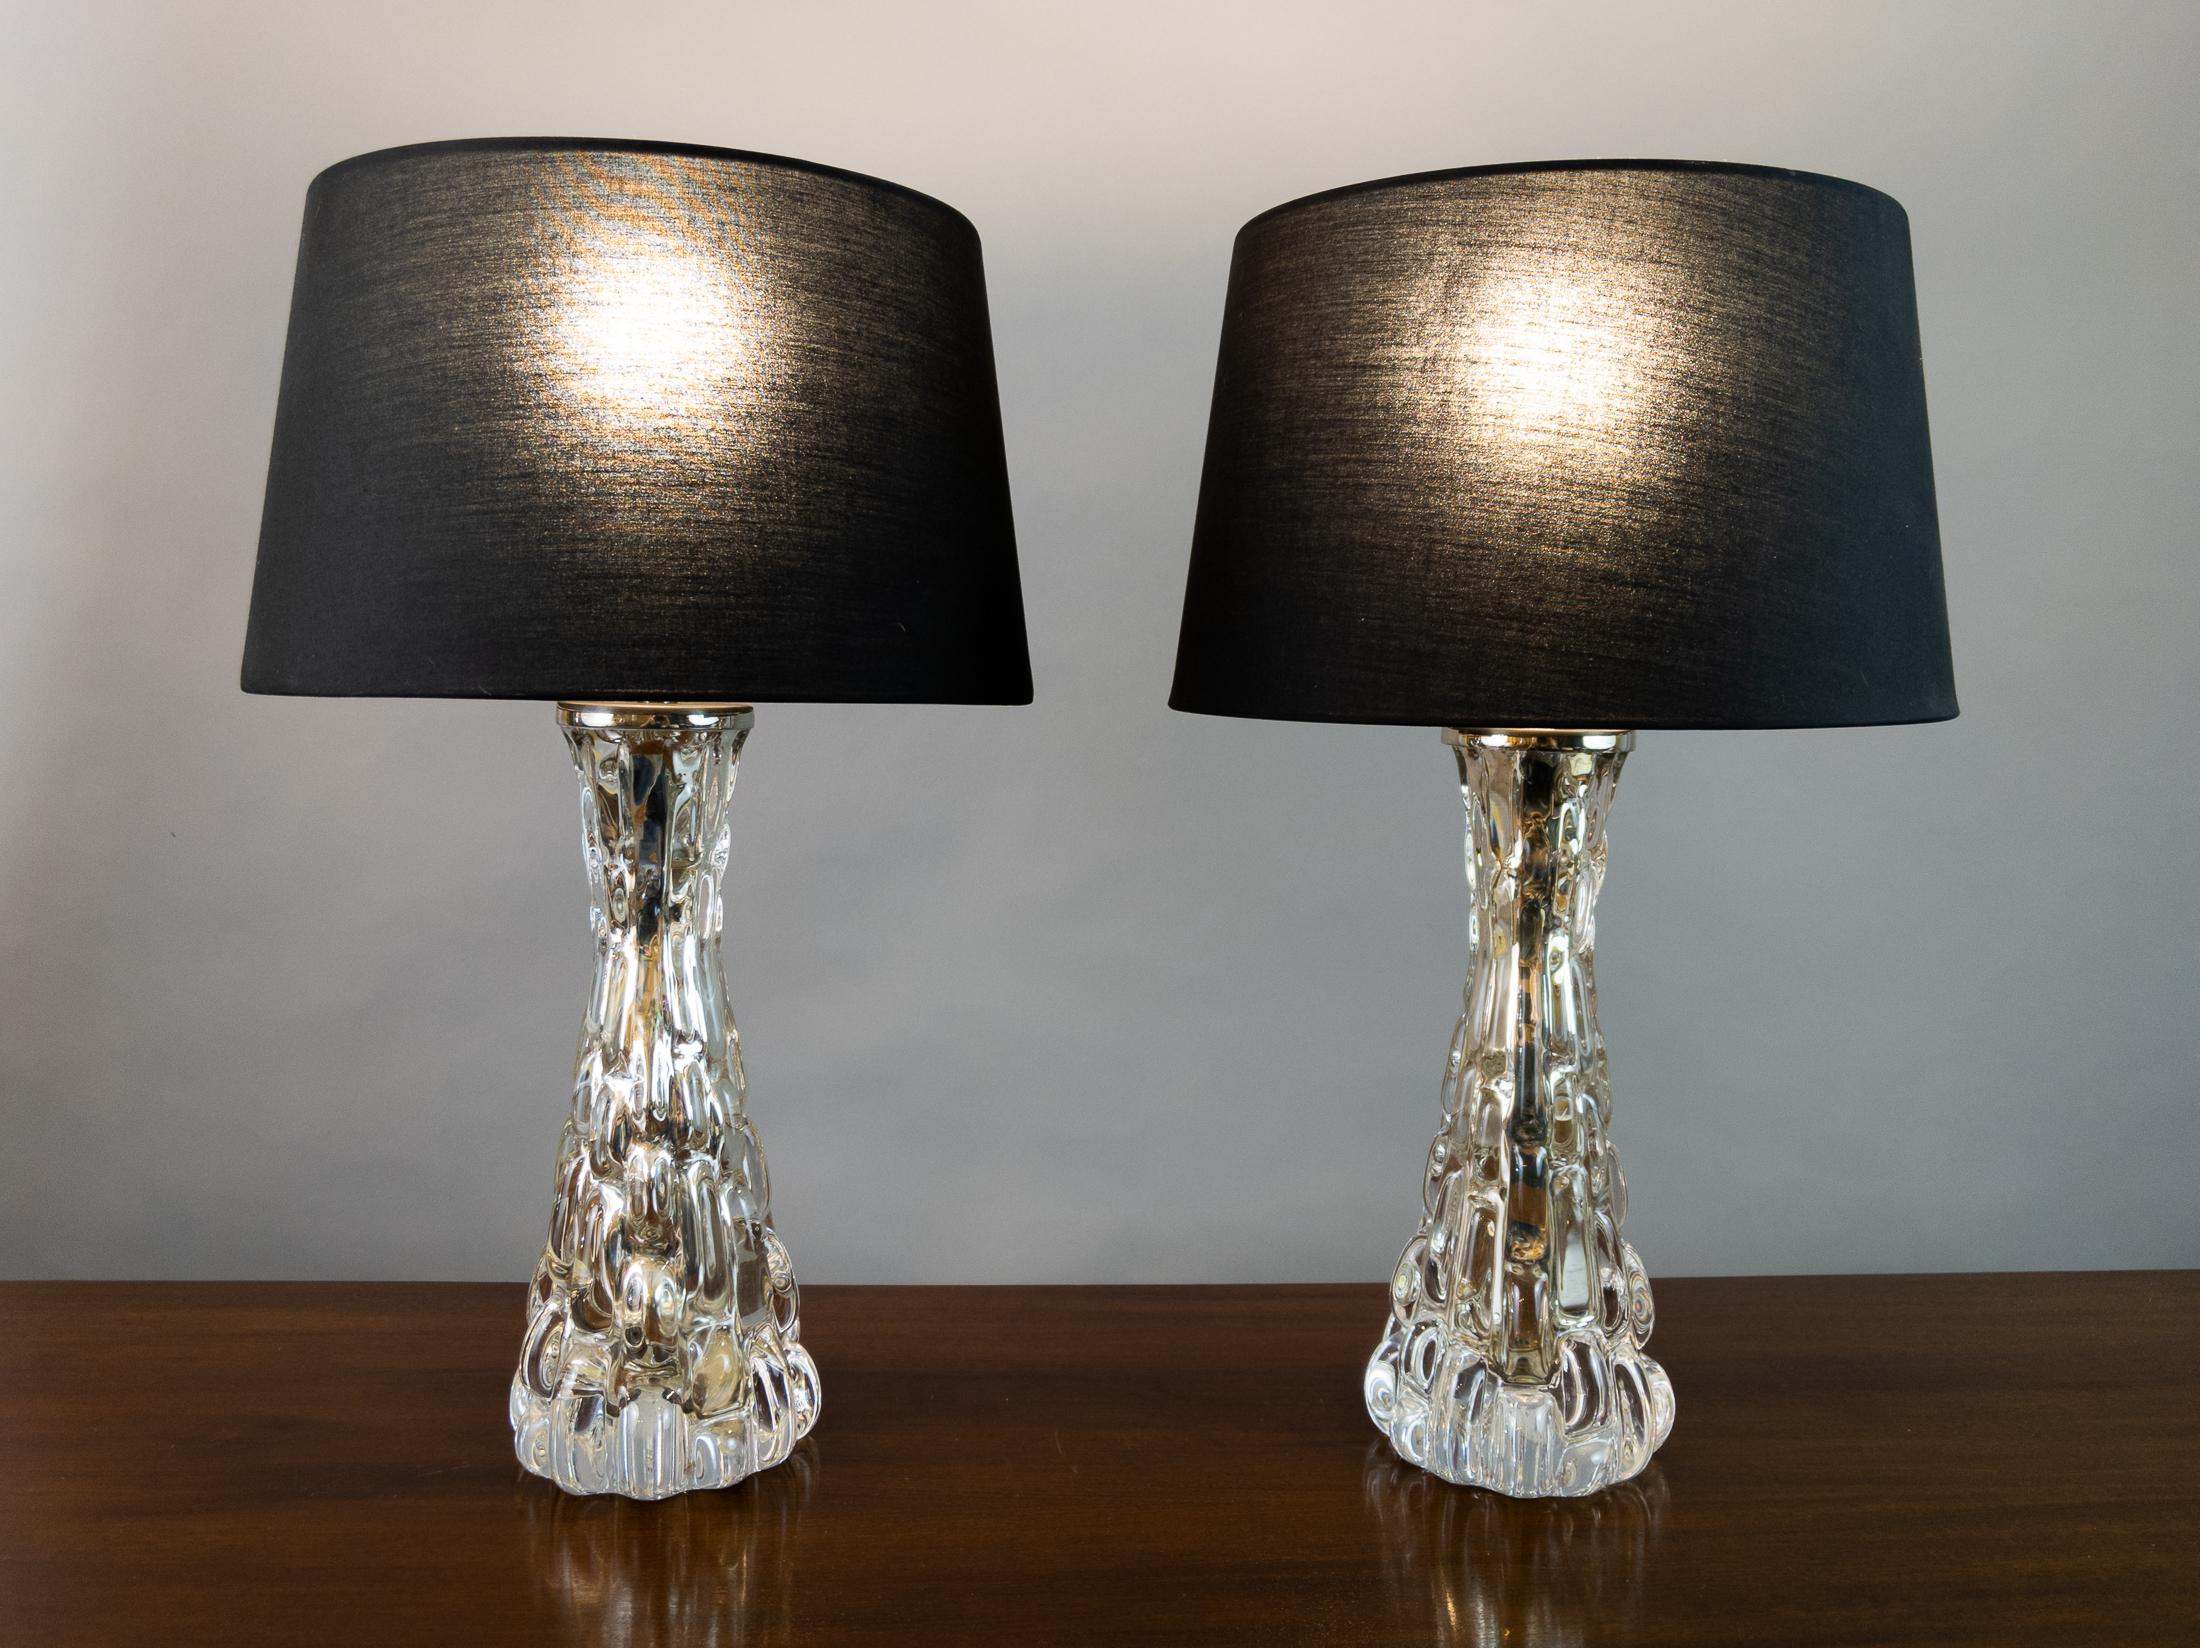 Pair of 1950s croco relief glass table lamps manufactured by Orrefors and designed by Carl Fagerlund, Sweden.  The lamps are created from molded glass with chrome rods which run through the centre of each light to conceal the flex. The internal rod